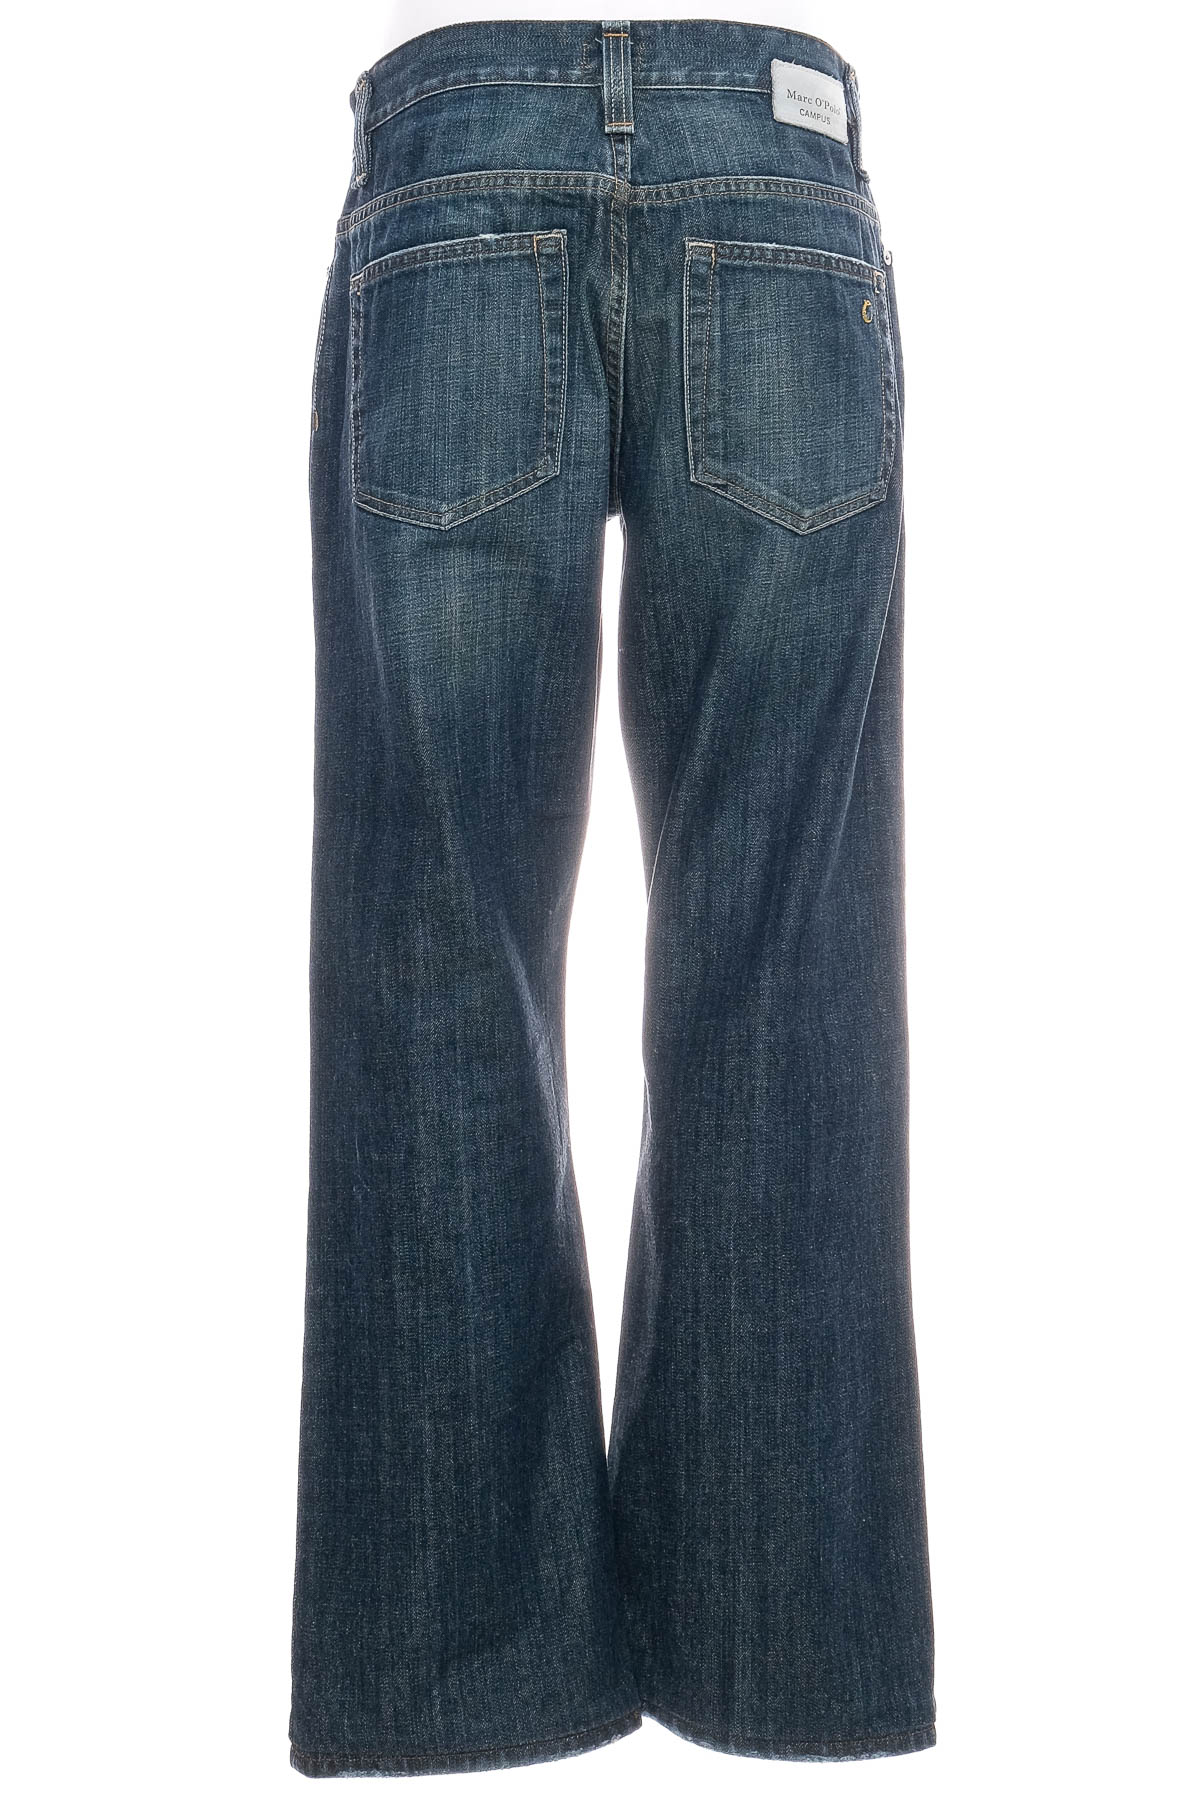 Men's jeans - CAMPUS by Marc O' Polo - 1